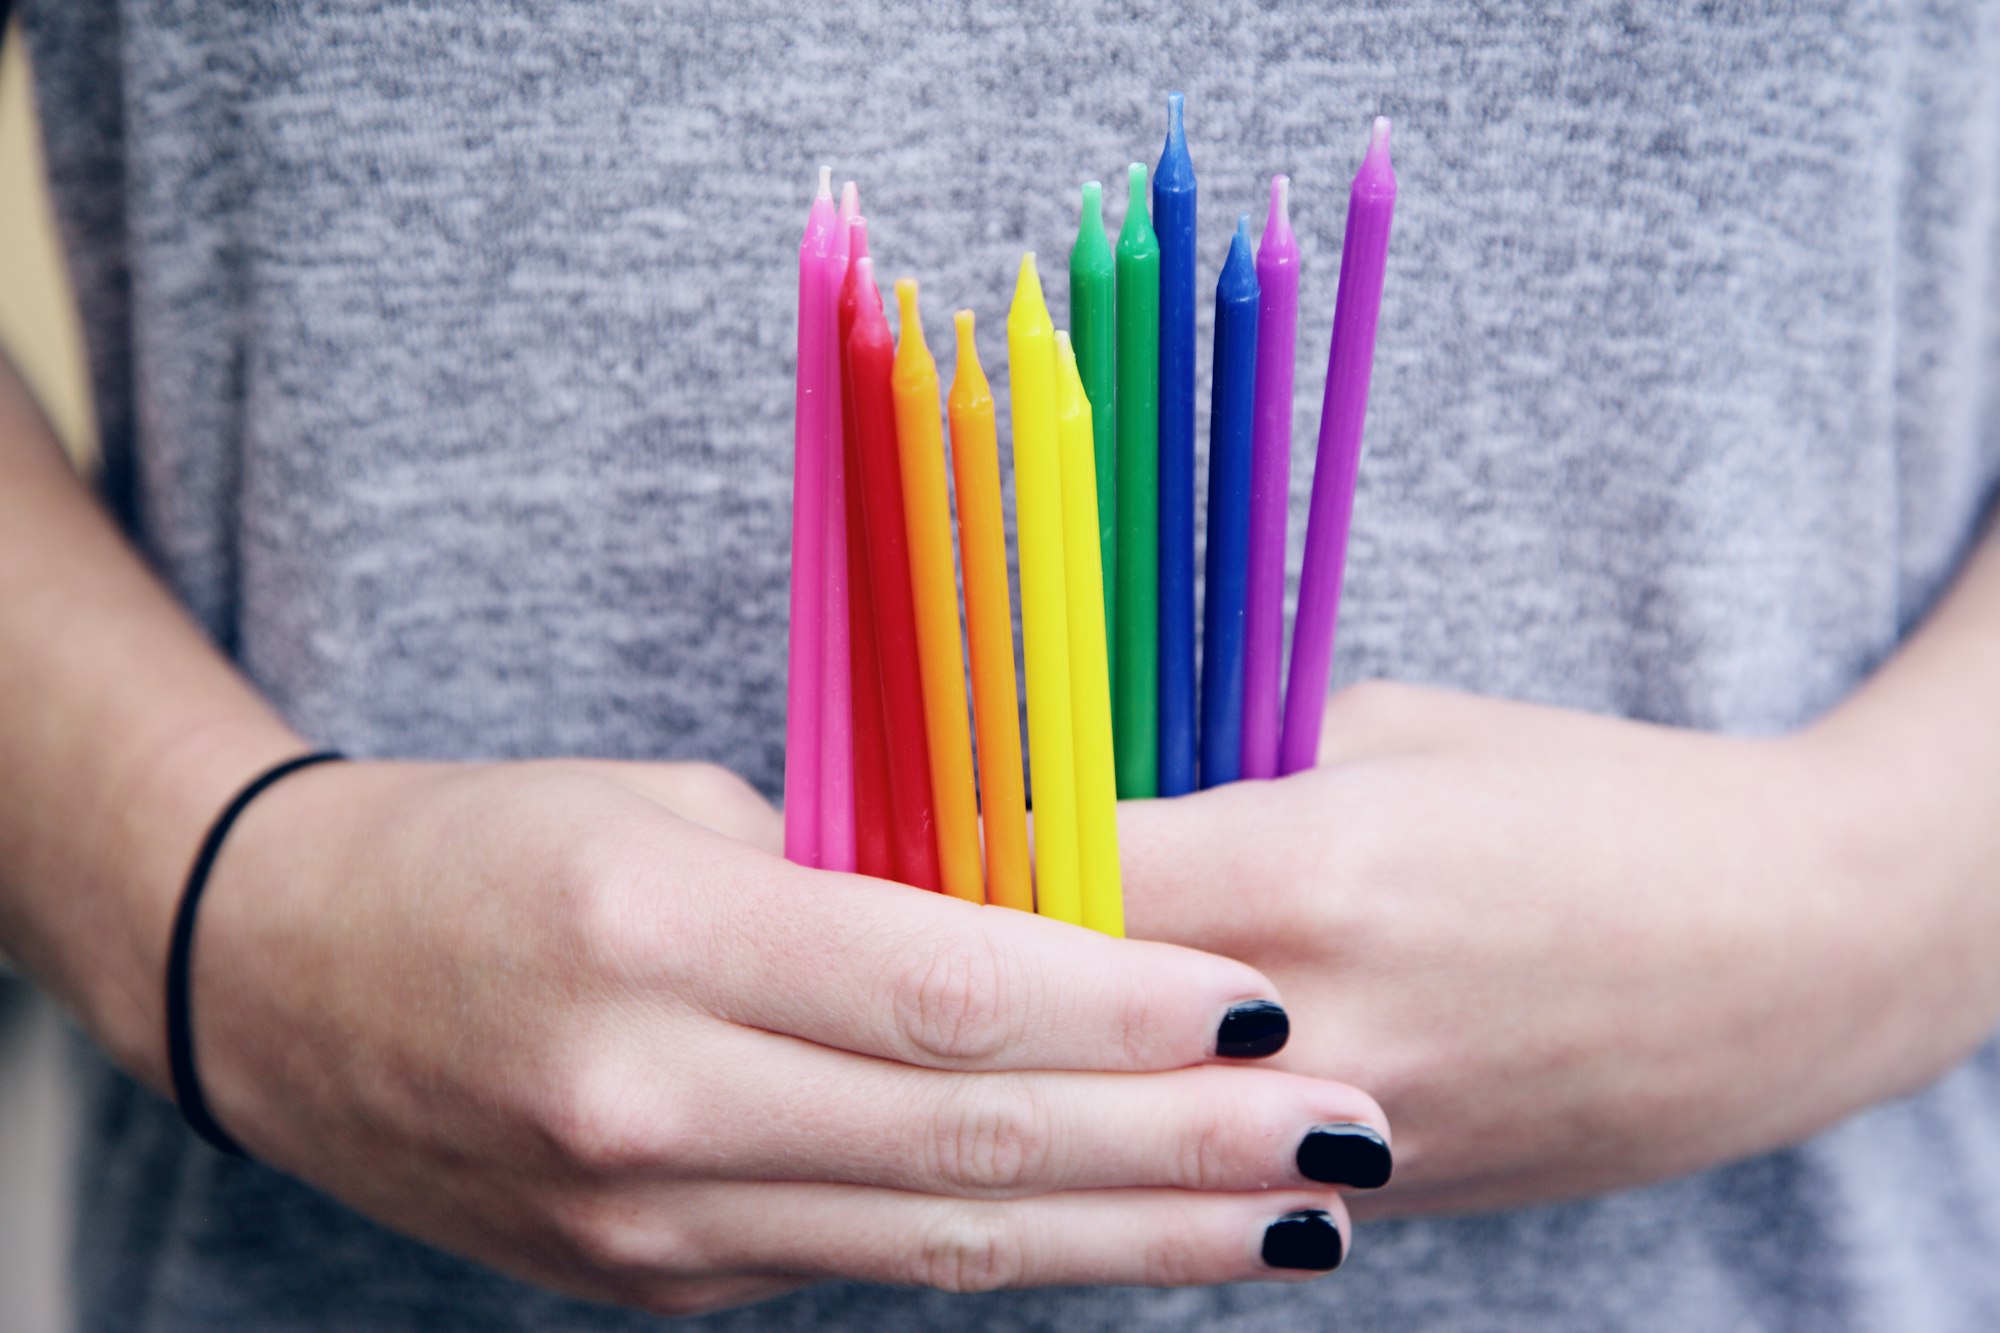 A set of long thin candles are held in clasped hands, ordered by color from pink and red to blue and purple.